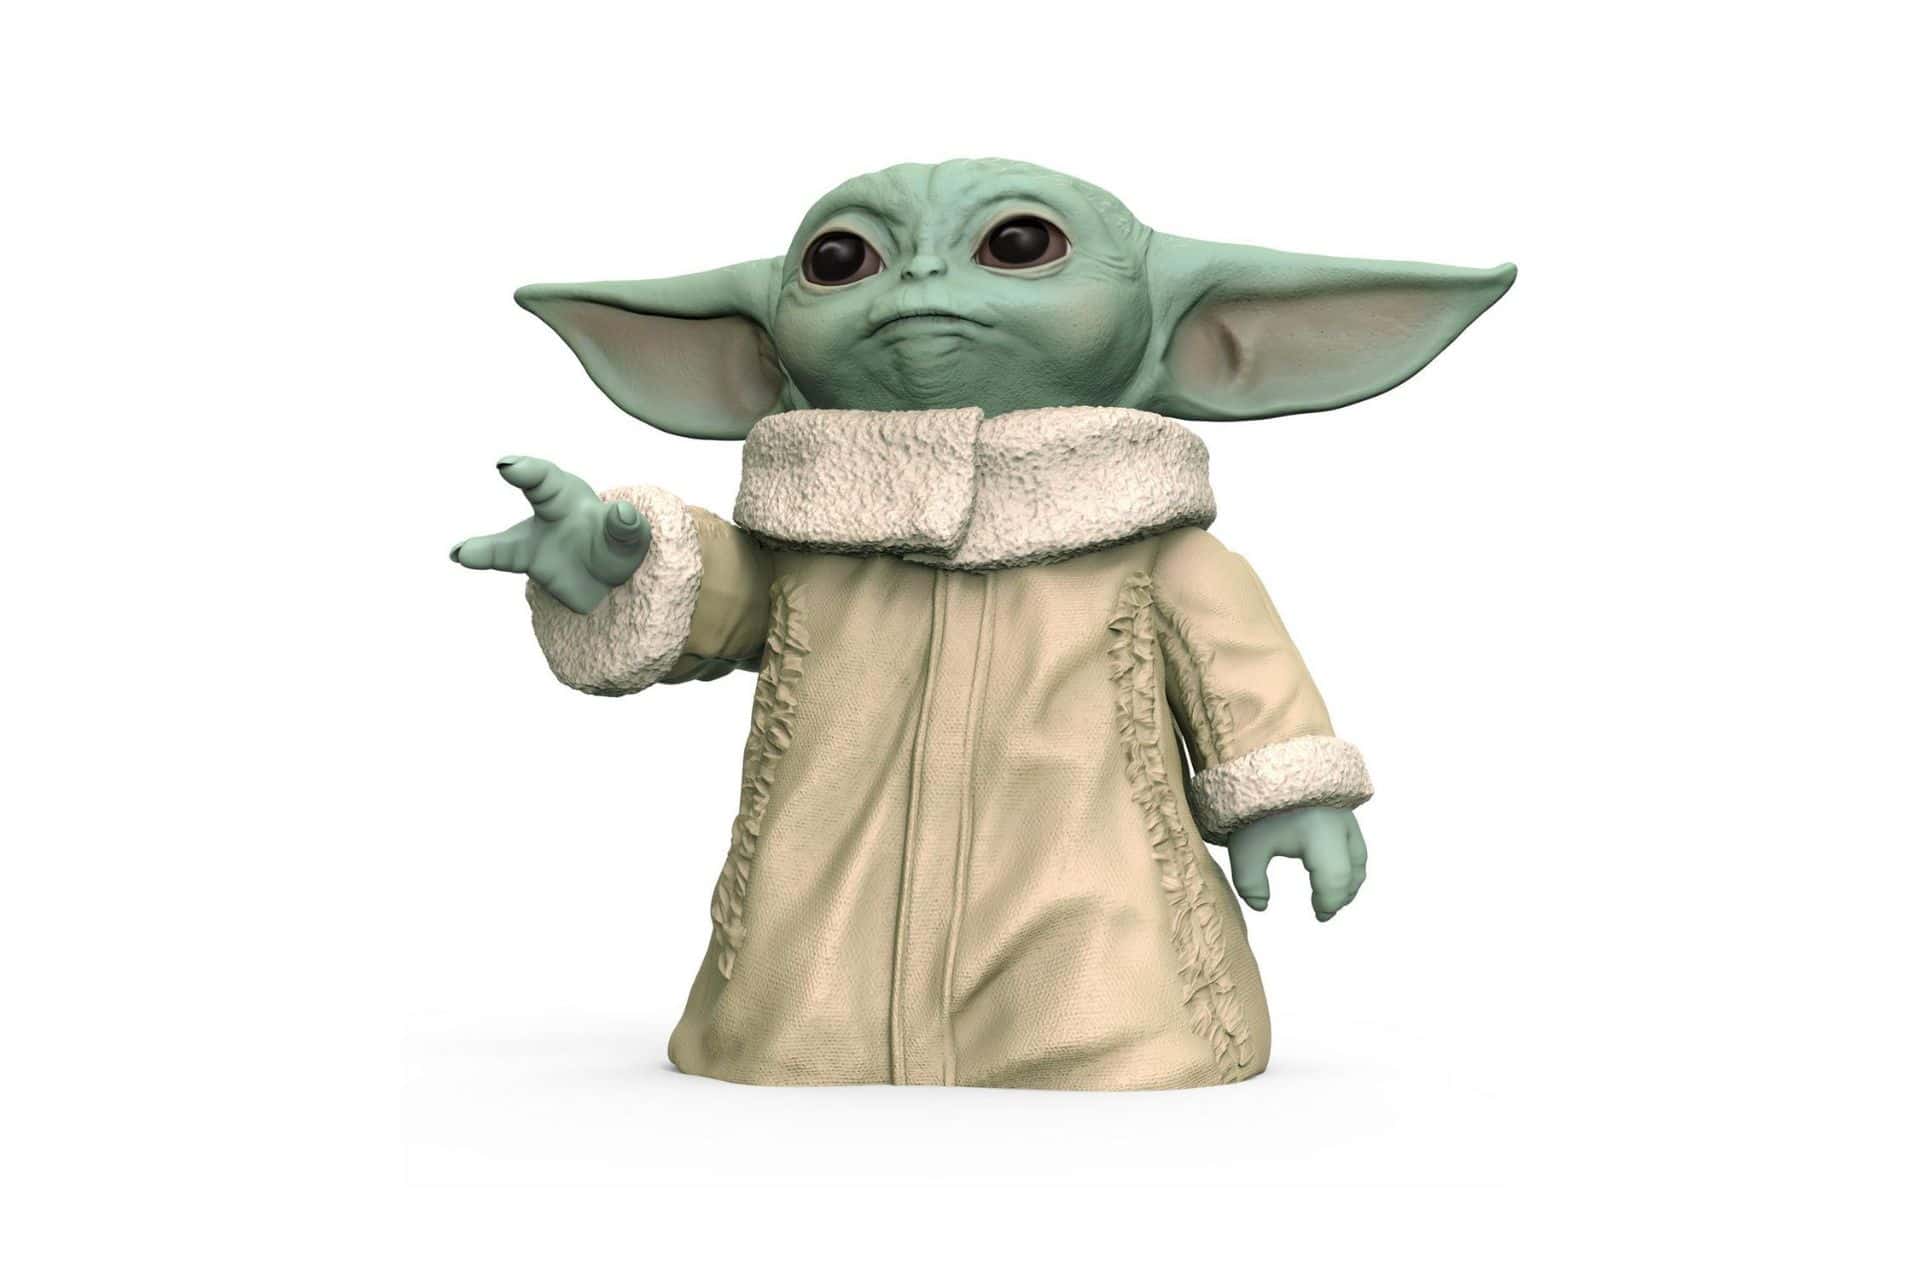 Star Wars The Child in a pointing pose